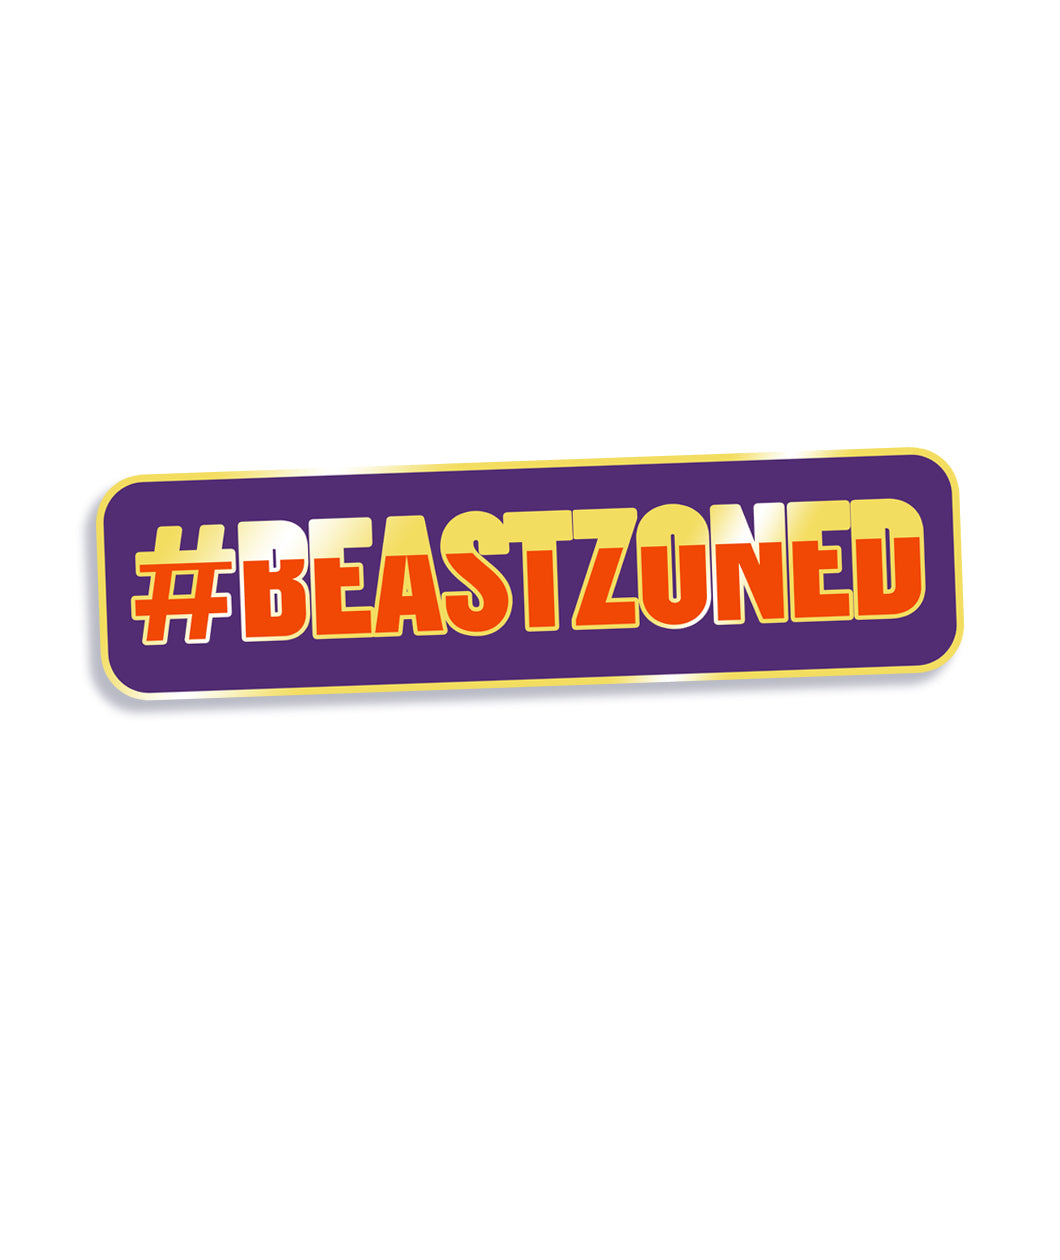 Purple rectangle with curved edges and gold outline. “#Beastzoned” is inside rectangle in sans serif font. Bottom two thirds is in orange and top third is in gold with gold outline - from Lindsay Ellis